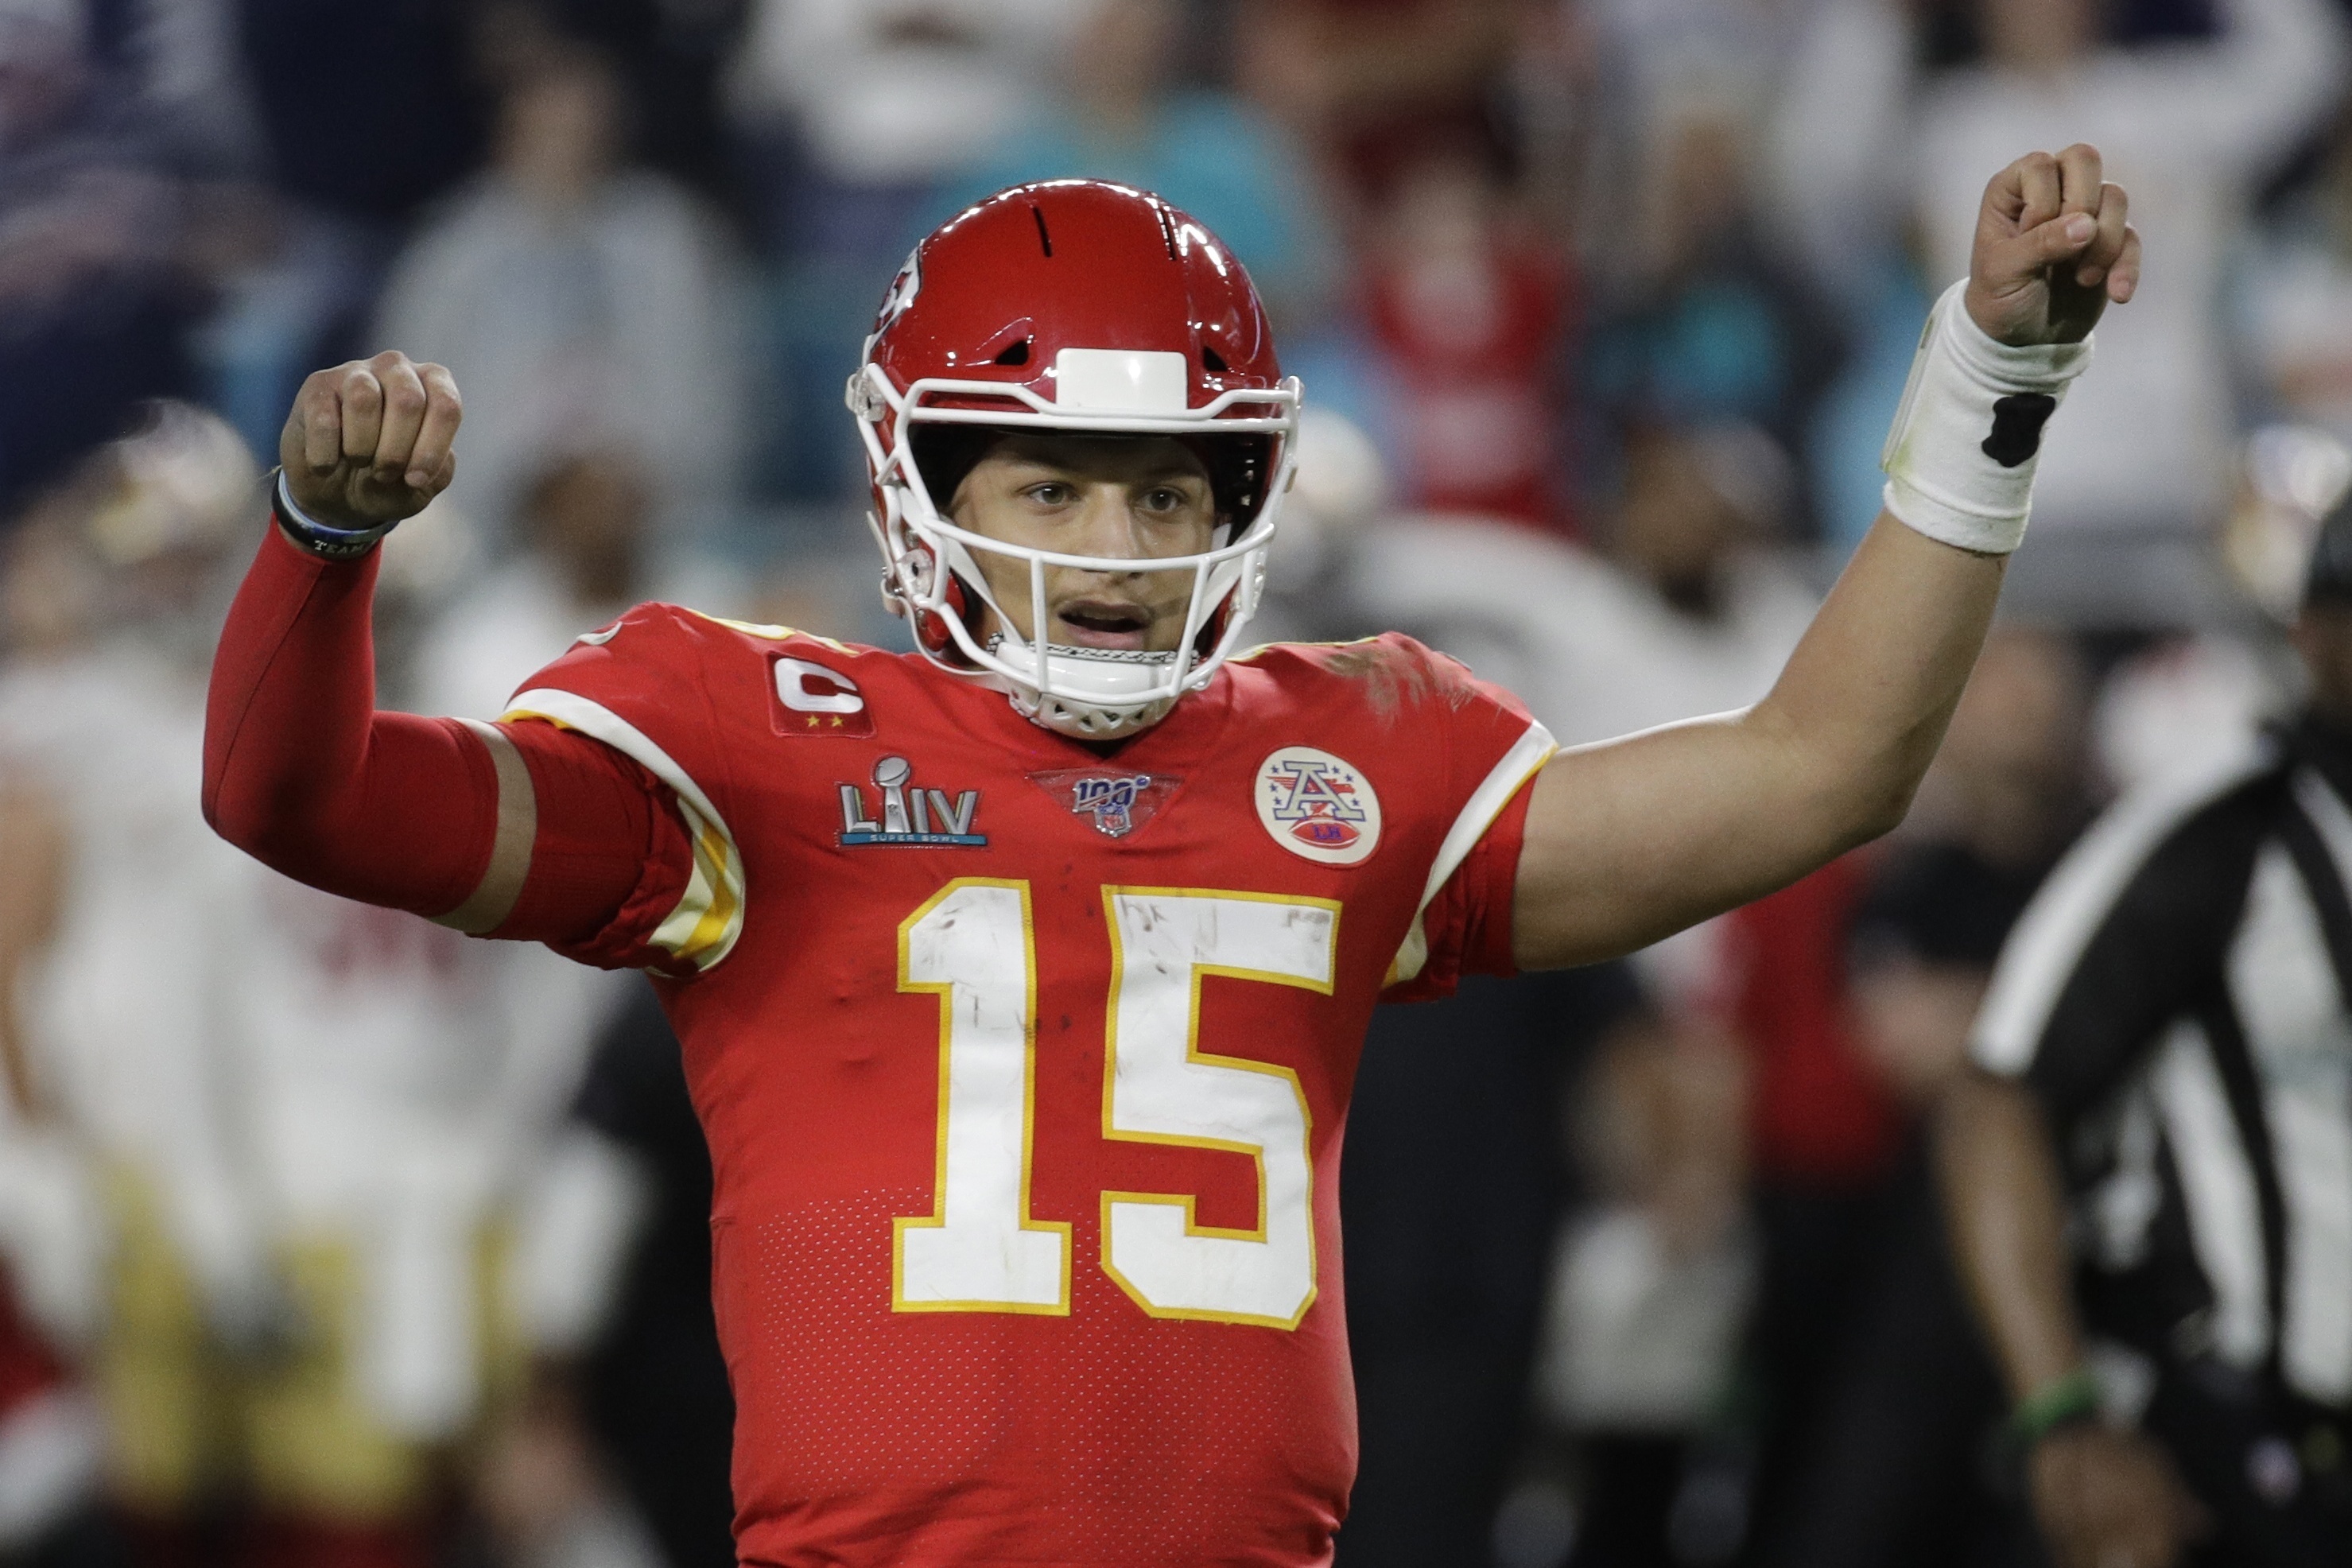 Patrick Mahomes I Want To Handle Chiefs Contract Extension The Smart Way Bleacher Report Latest News Videos And Highlights